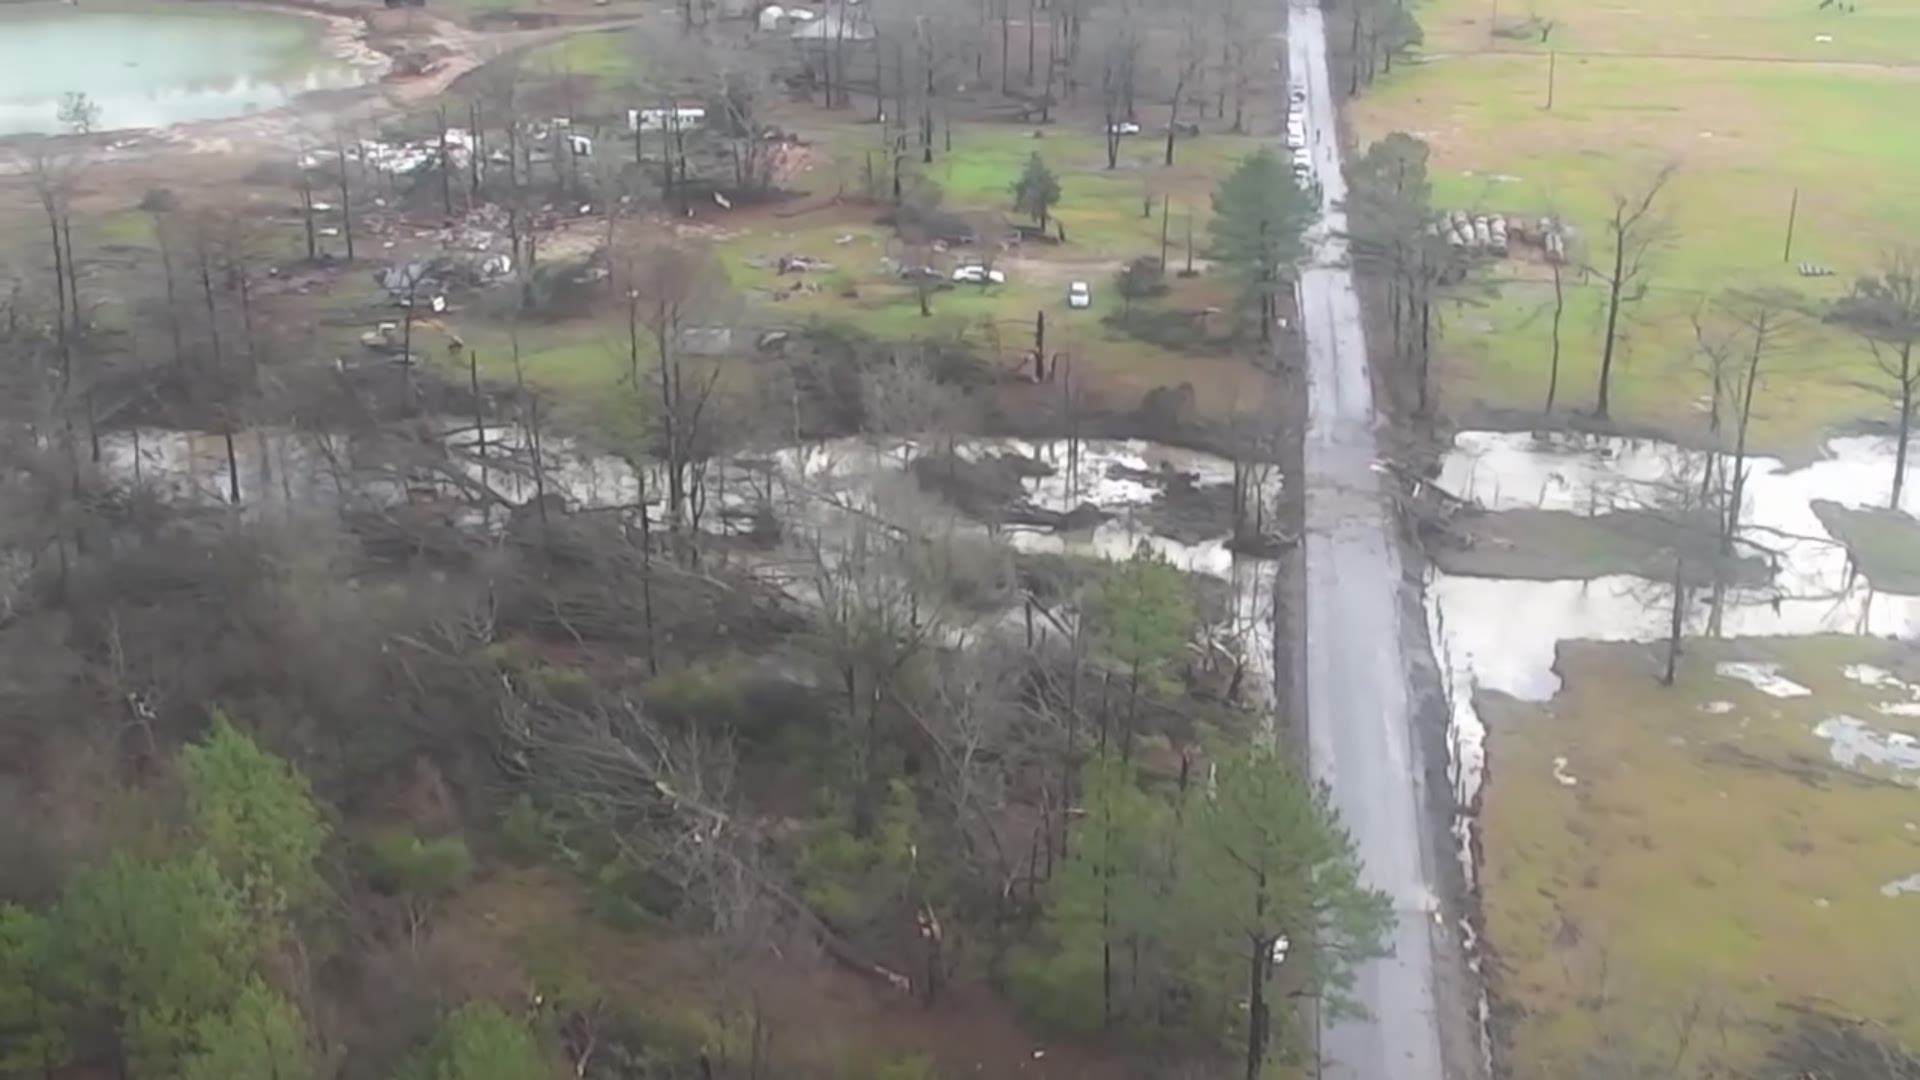 A severe storm destroyed a trailer home in Bossier Parish Saturday, killing an elderly couple.